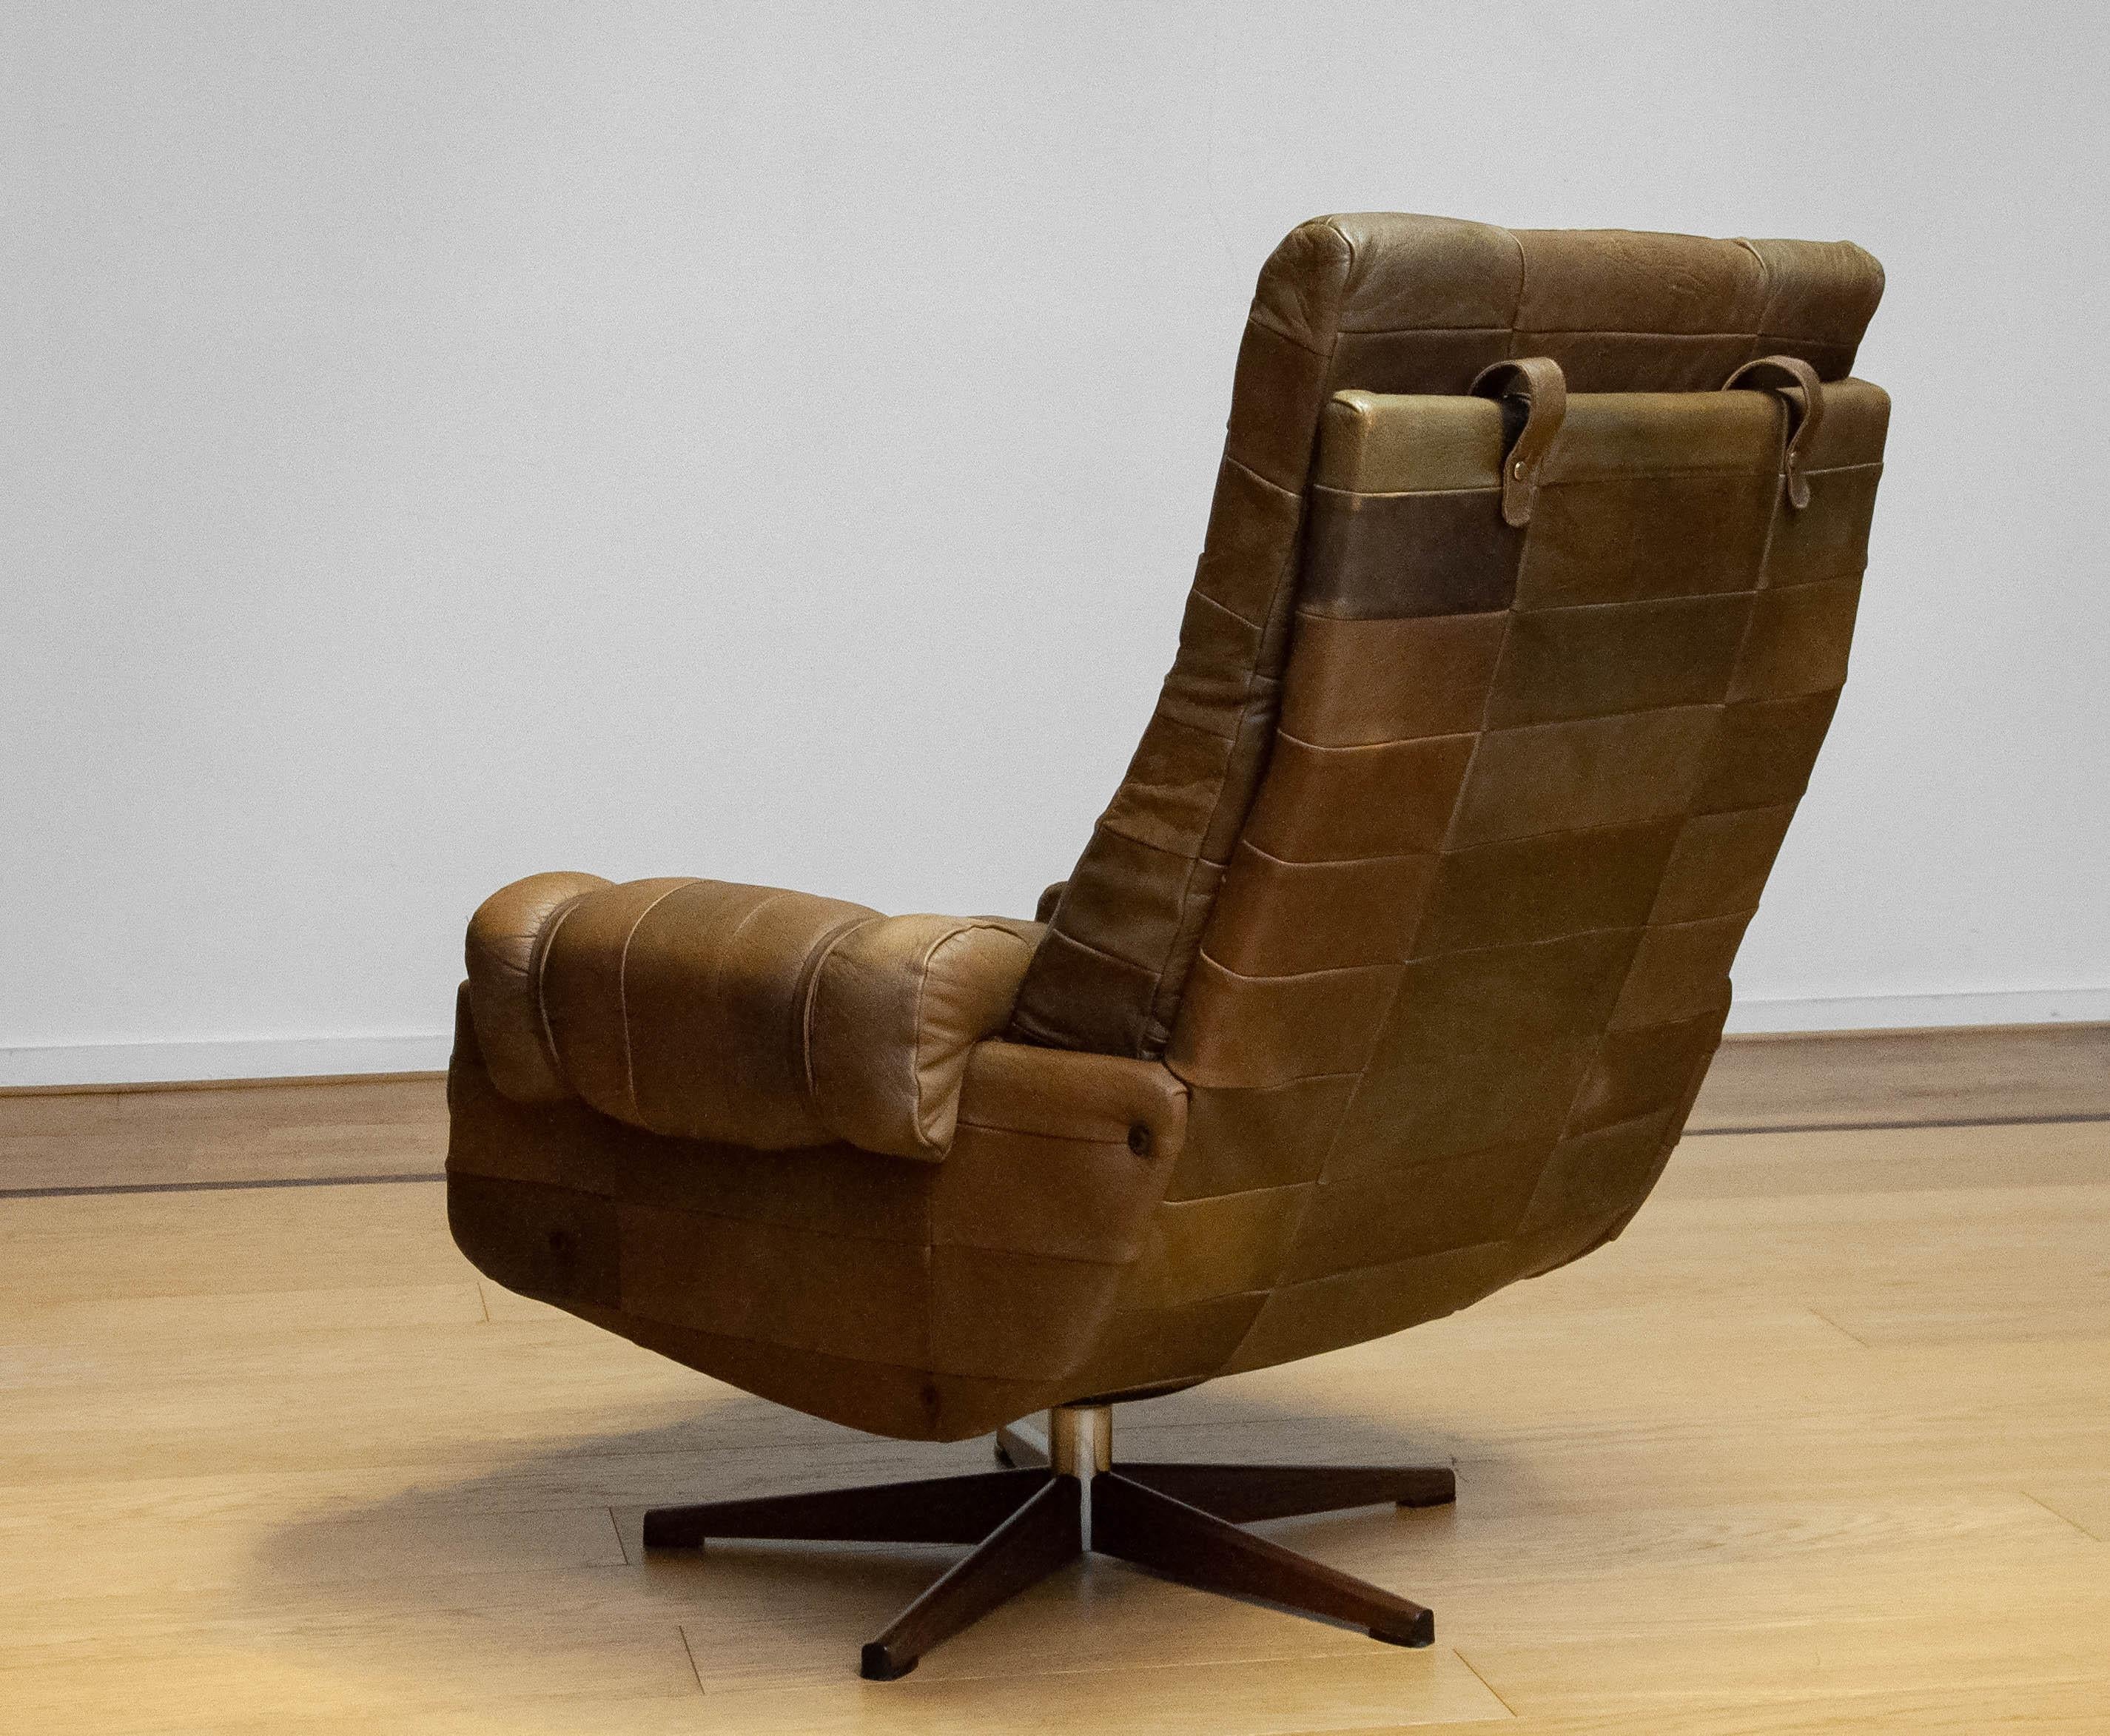 Late 20th Century 70s Swivel Chair By Arne Norell Möbel AB In Sturdy Olive Green Buffalo Leather